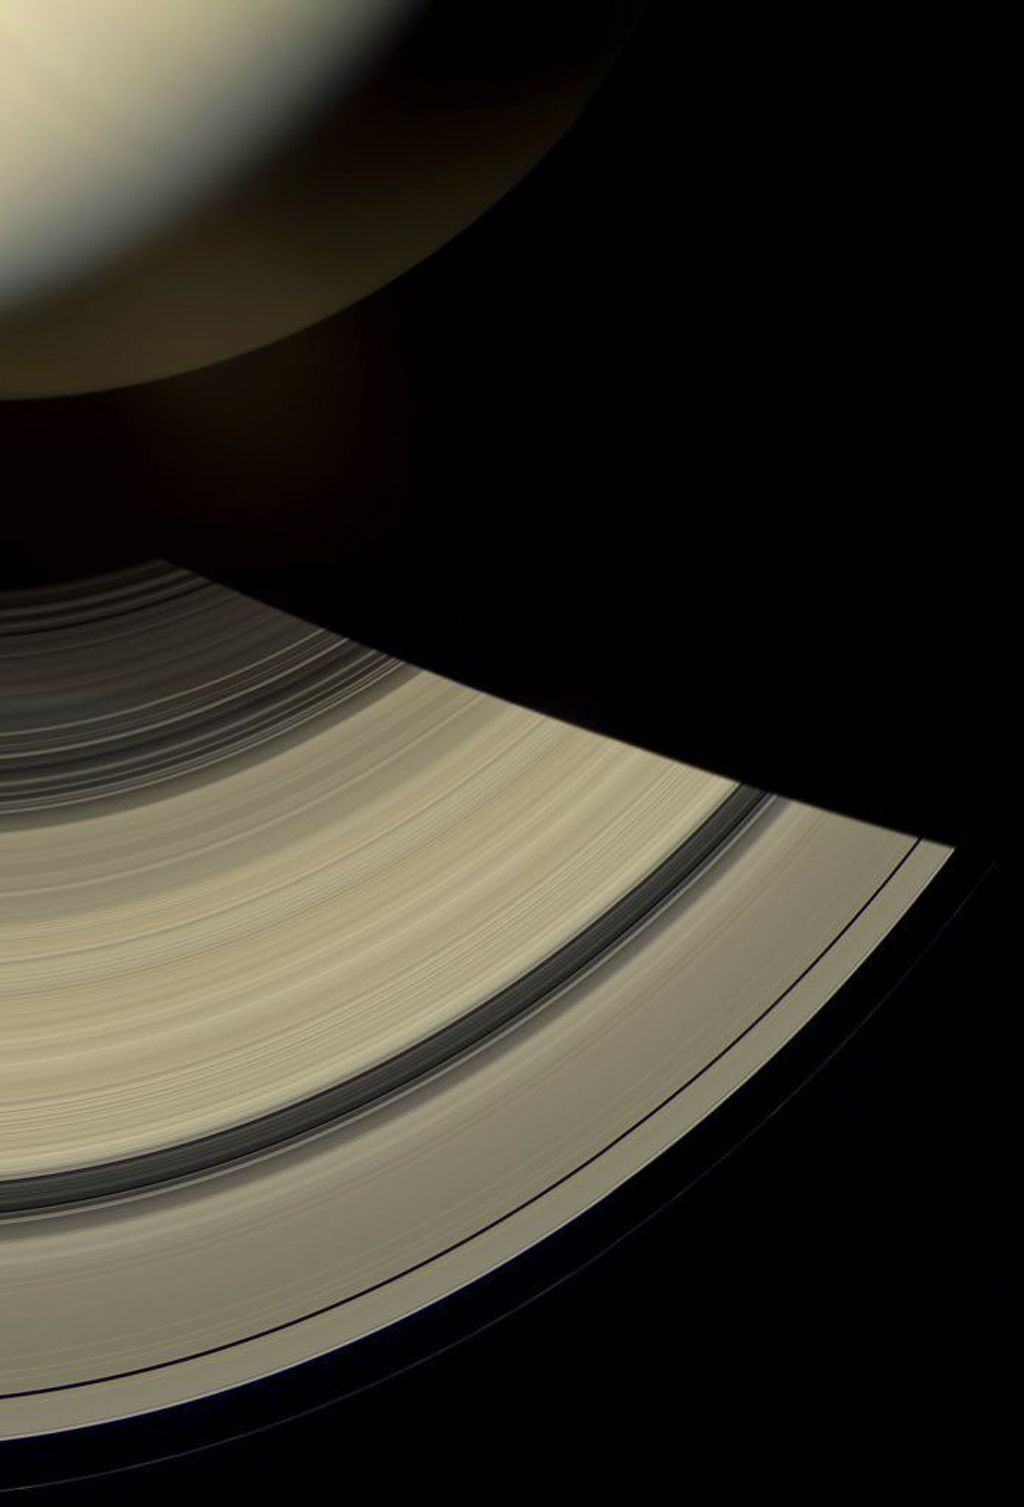 Image of the shadows on Saturn's rings